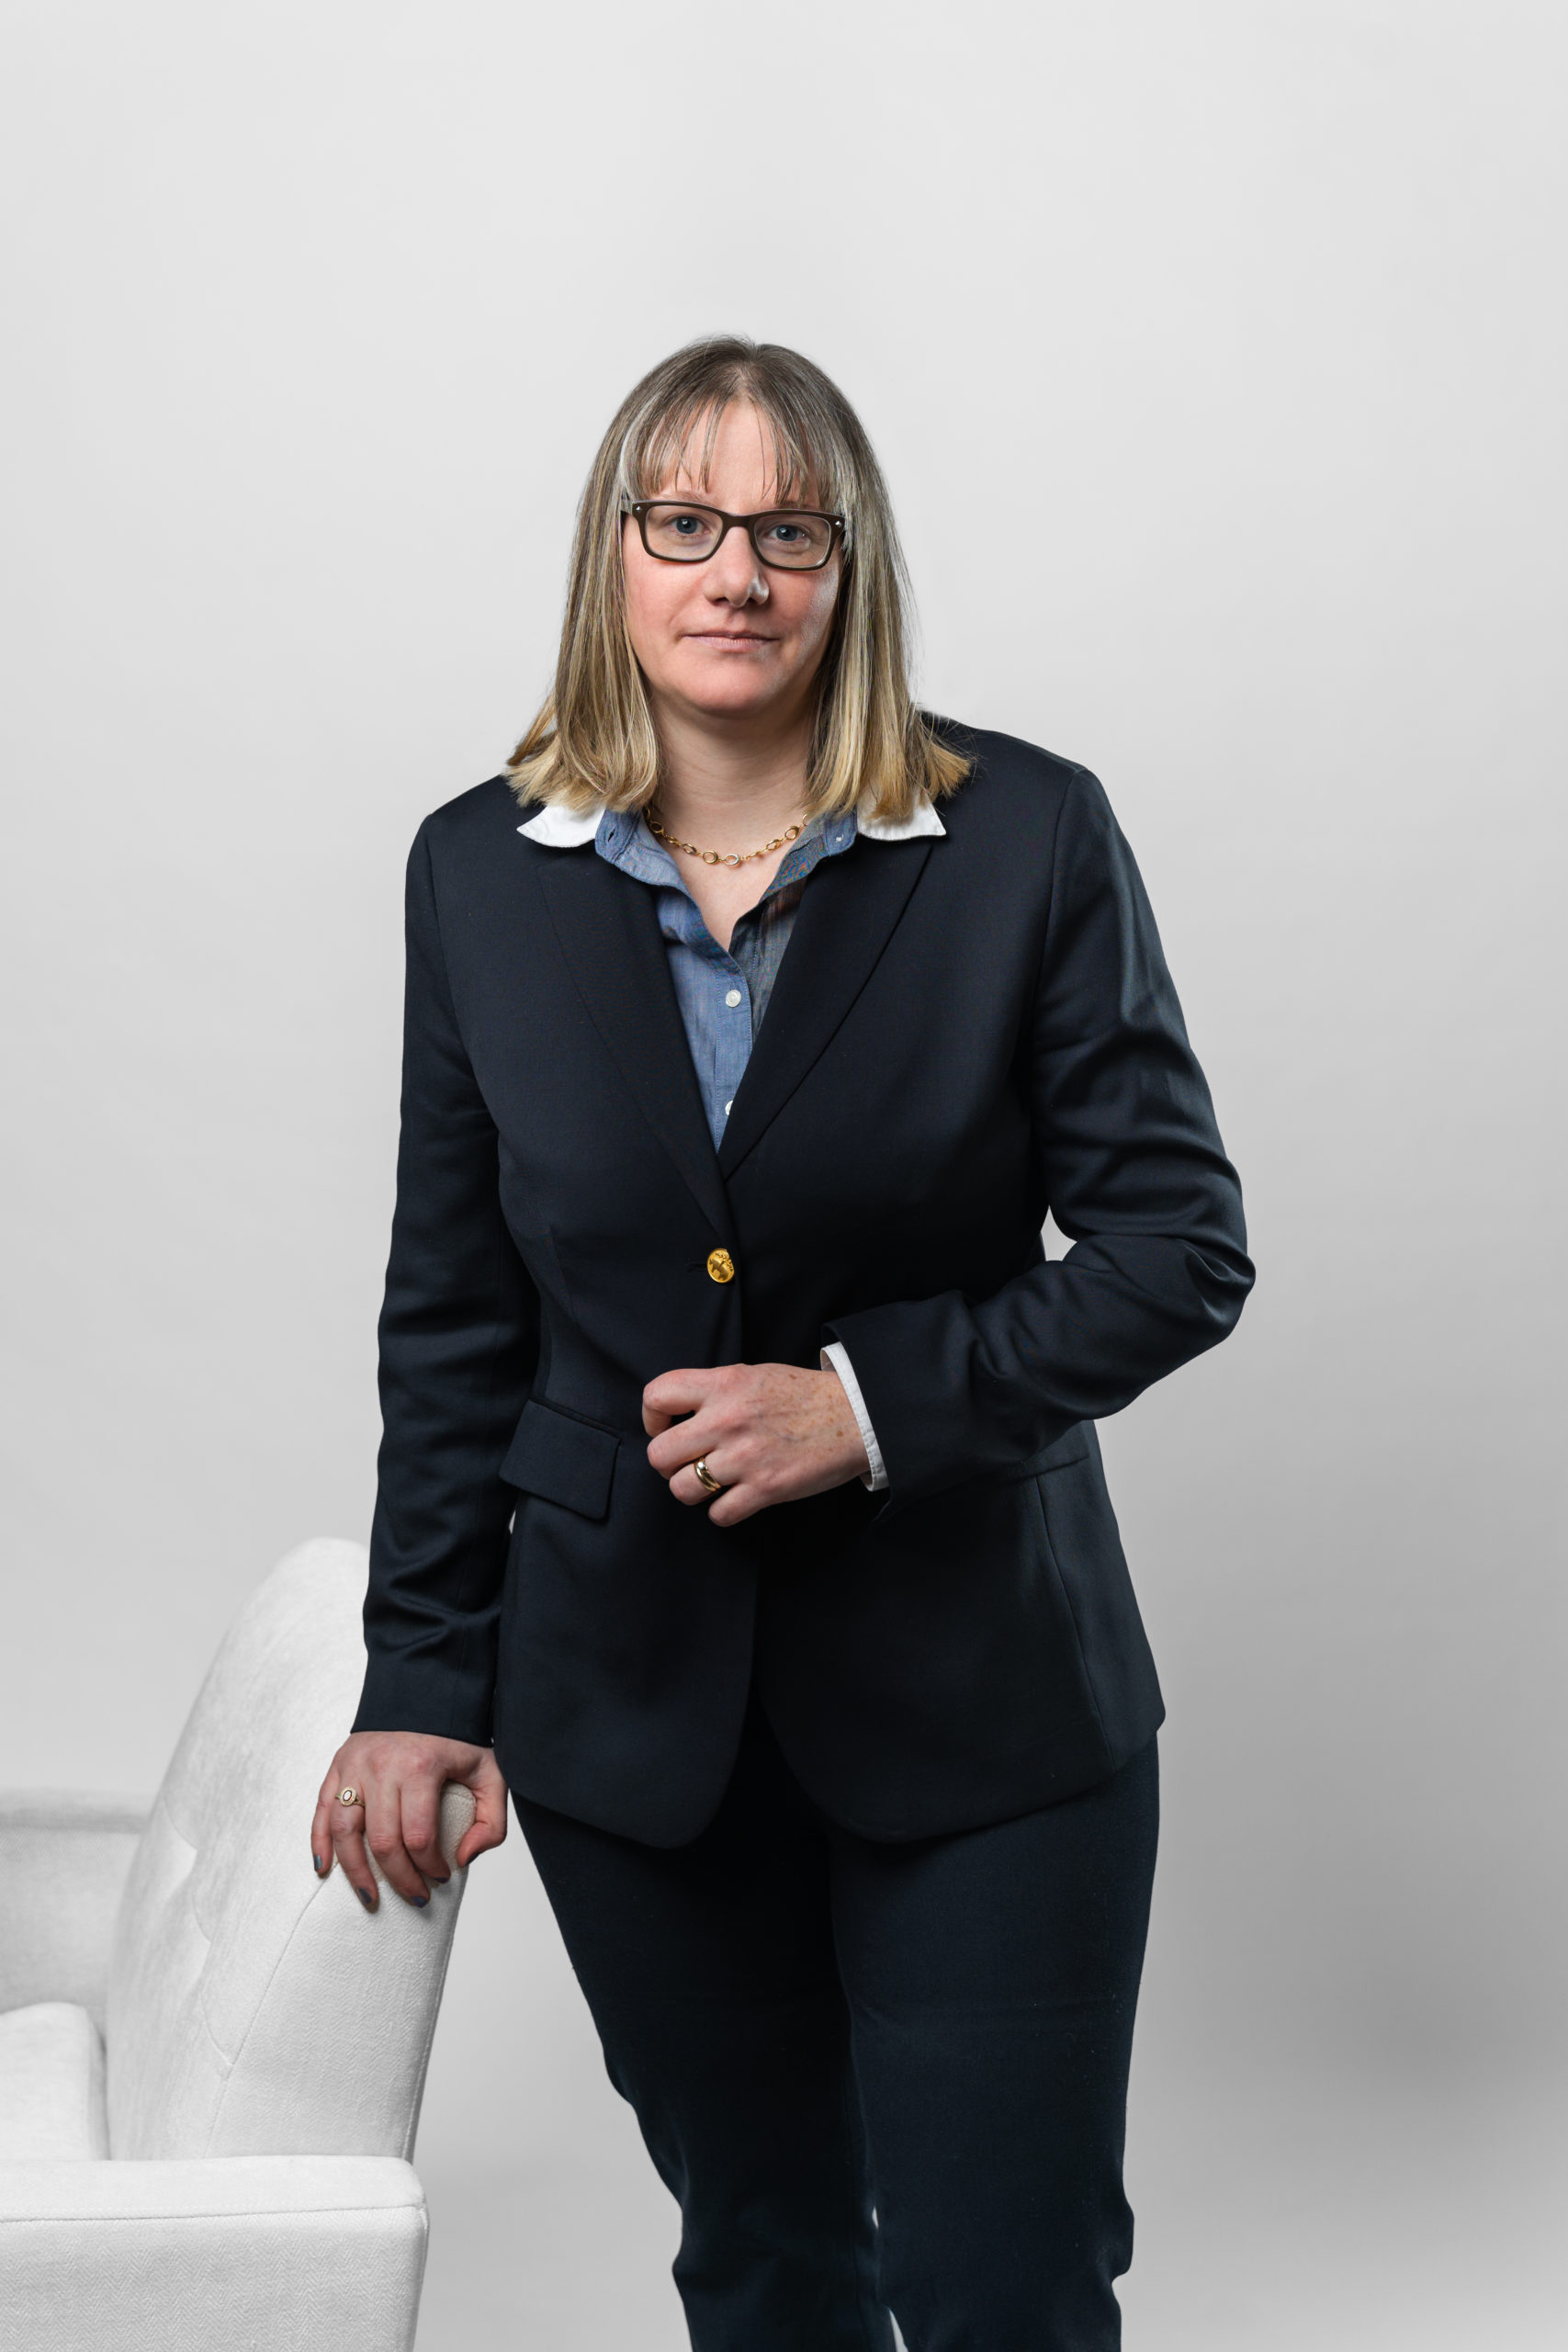 Kelly A. Driscoll, BBA, LLB Barrister & Solicitor 